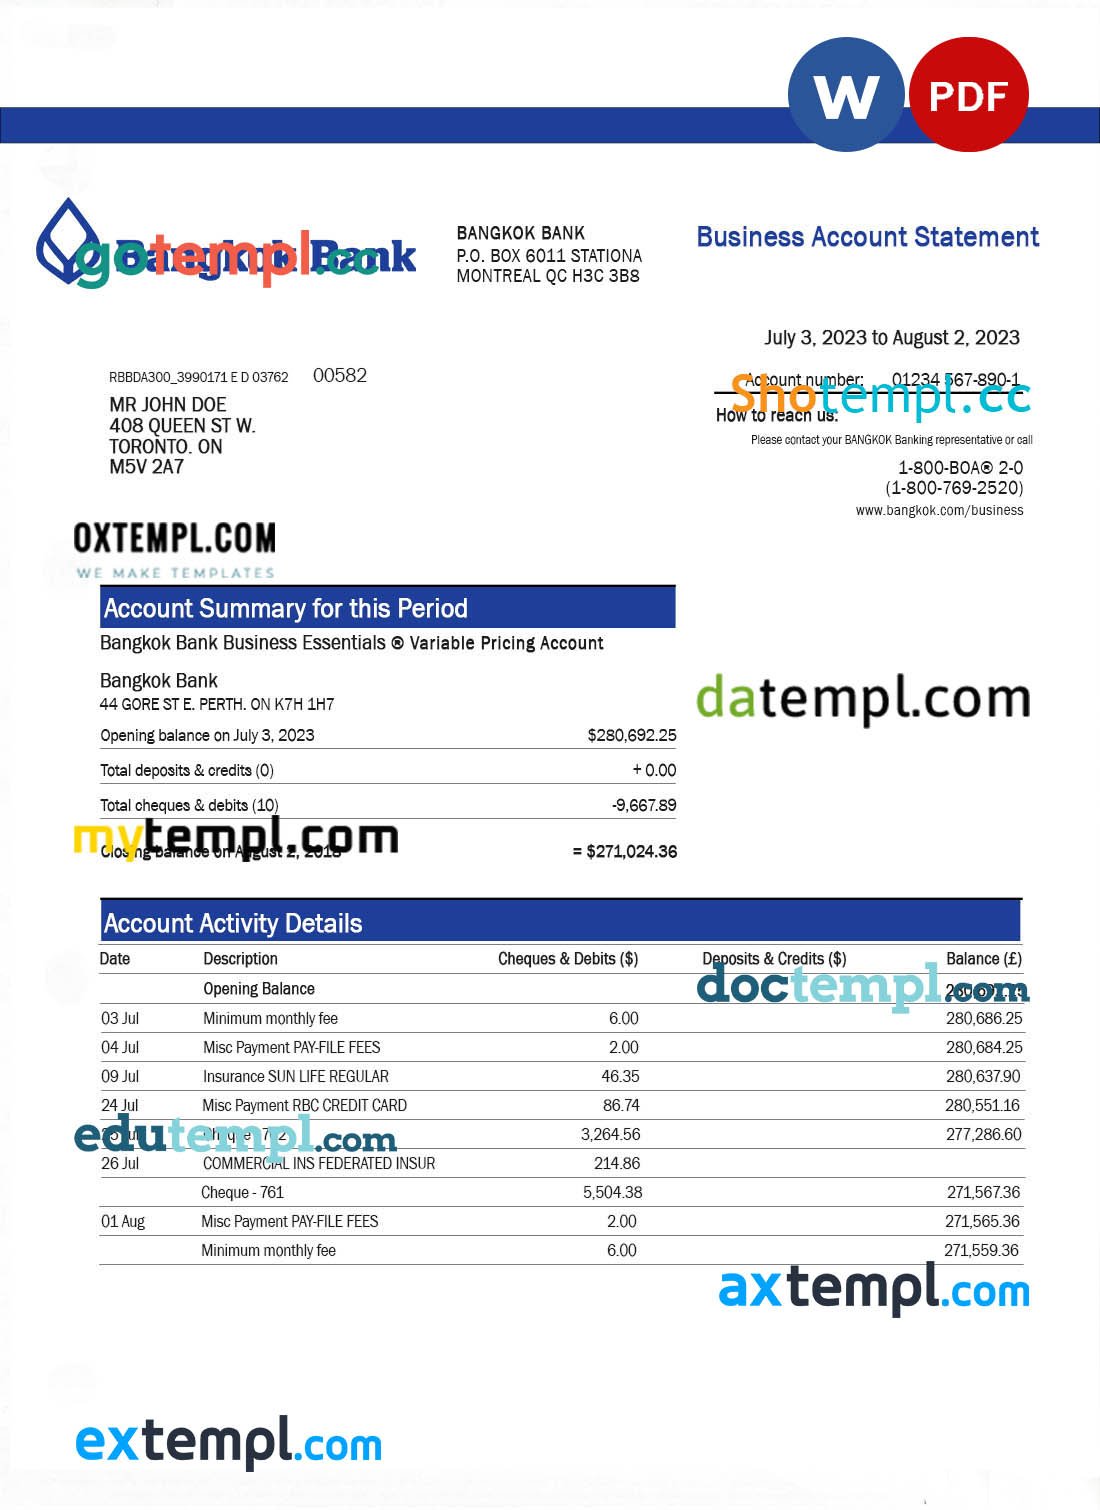 Panama Banco Aliado bank account reference letter template in Word and PDF format